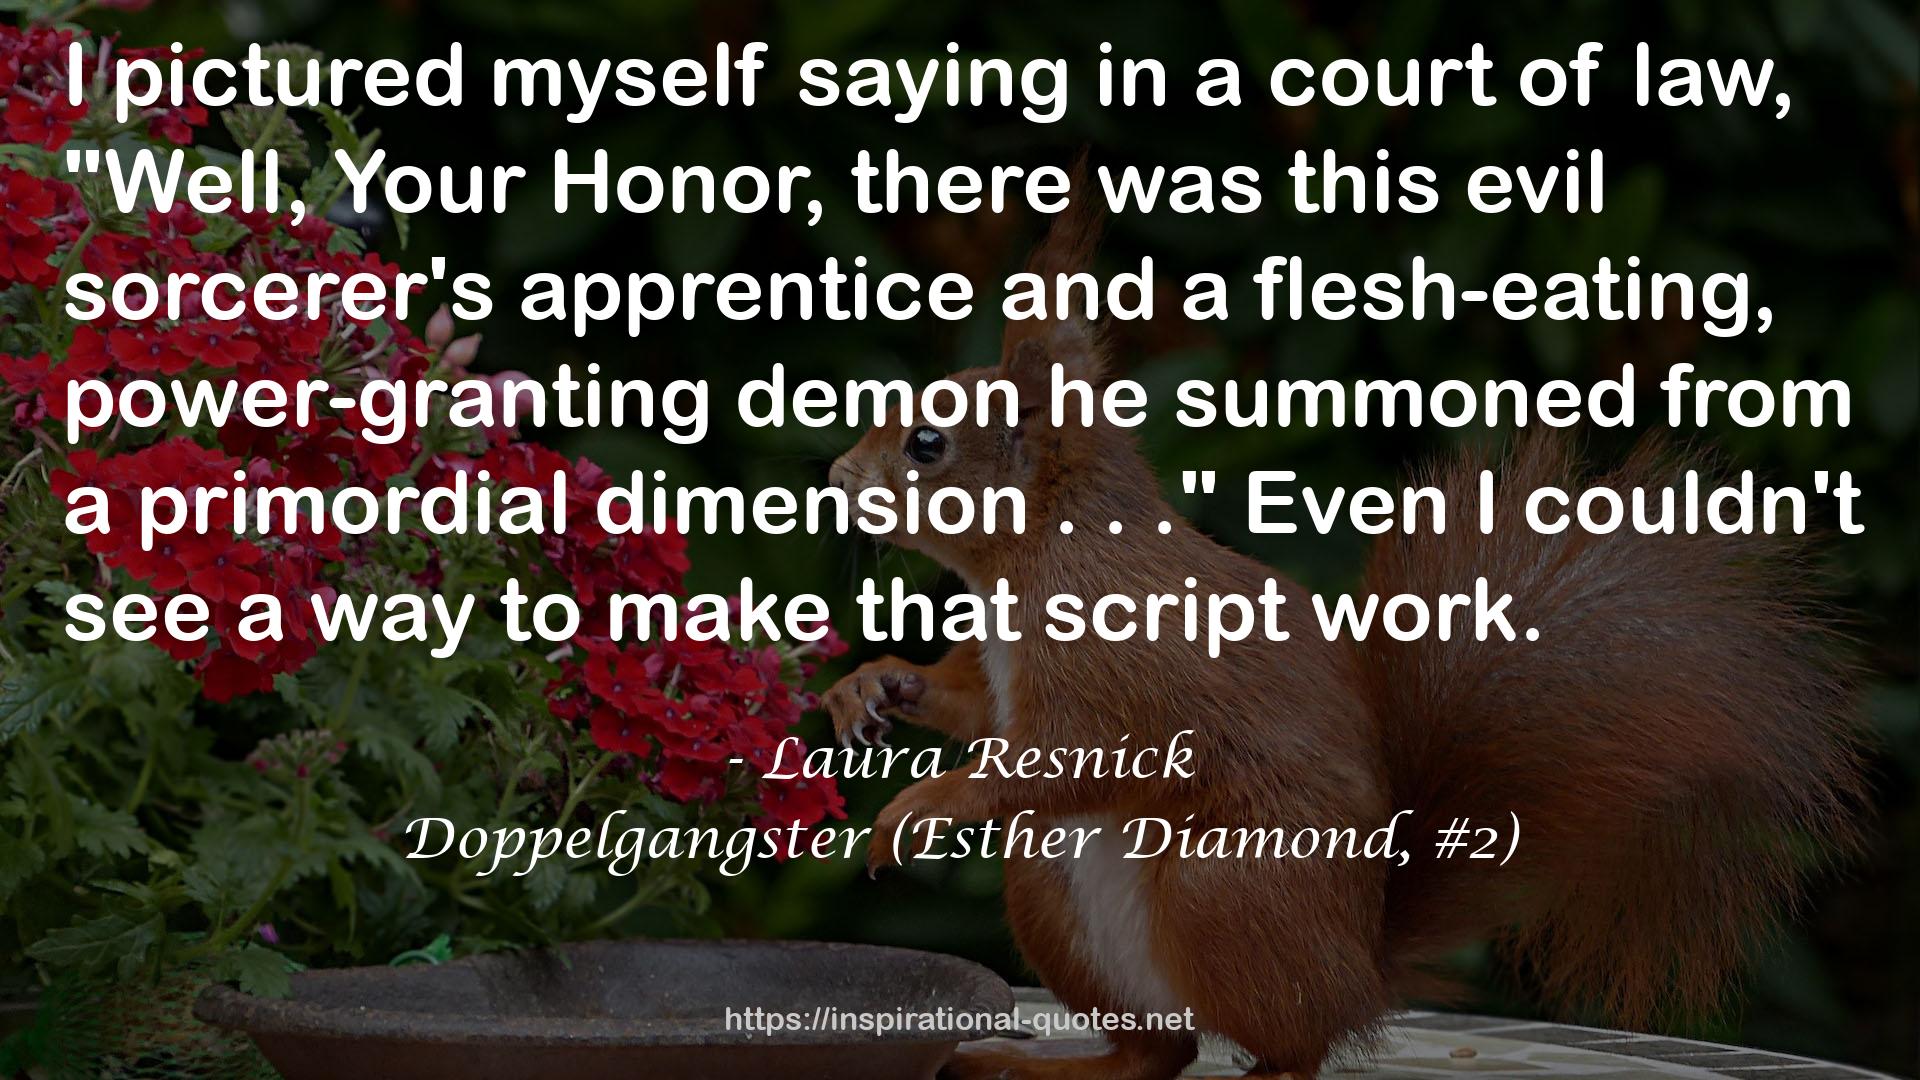 Doppelgangster (Esther Diamond, #2) QUOTES